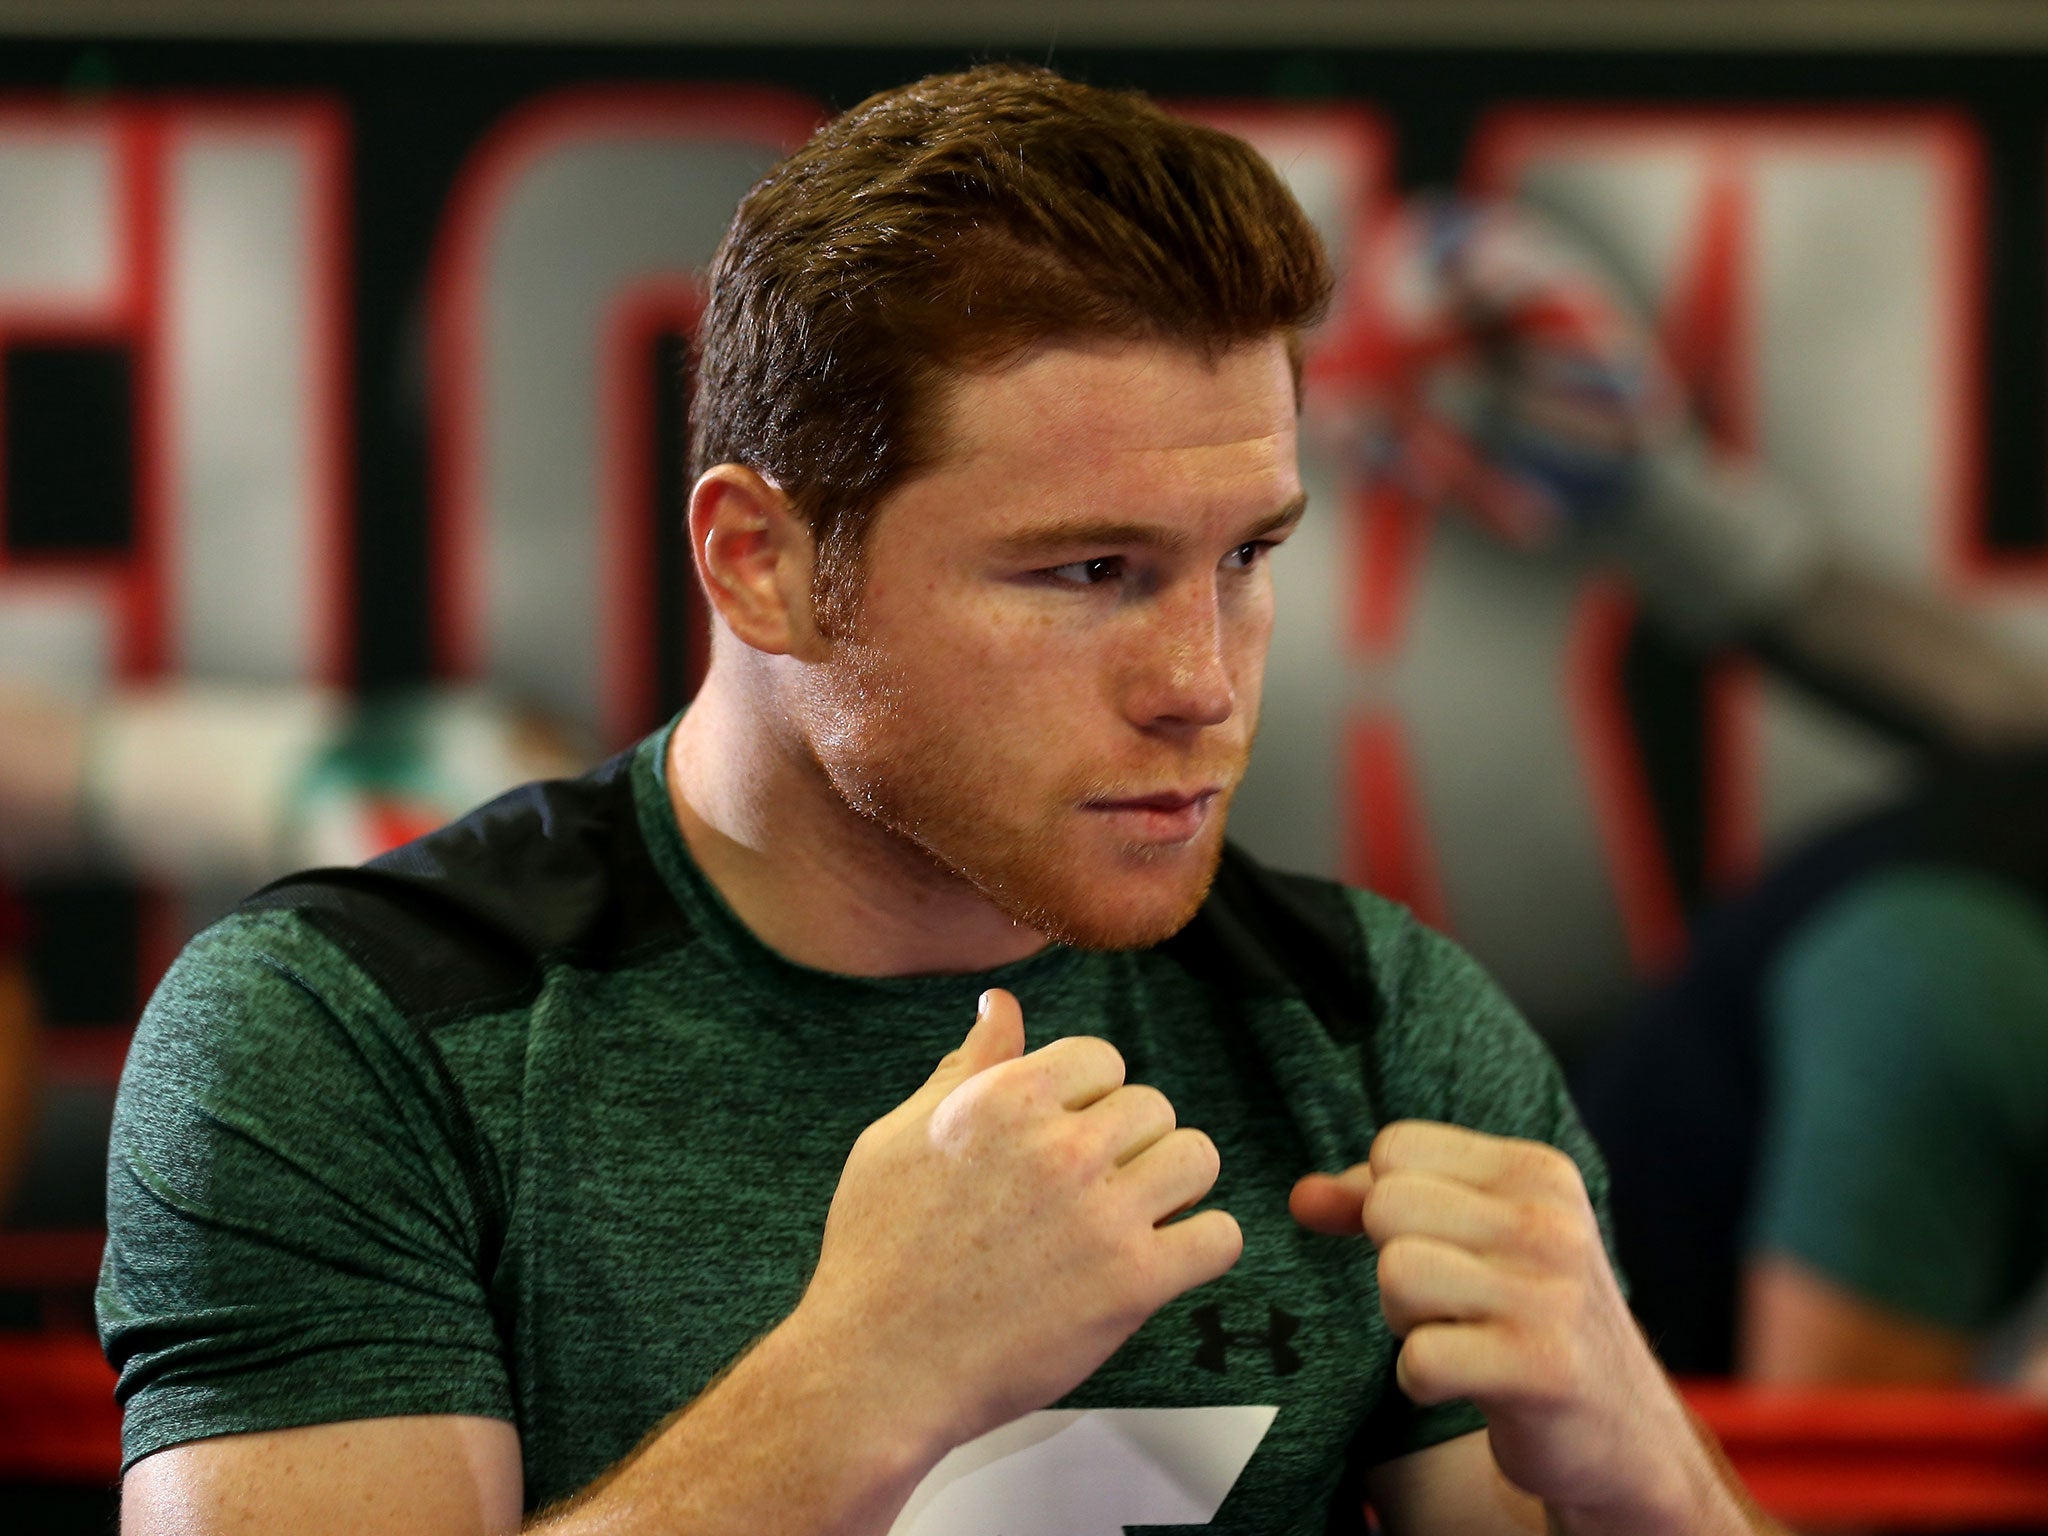 The promoters said Alvarez has tested clean dozens of times over the course of his previous 12 fights